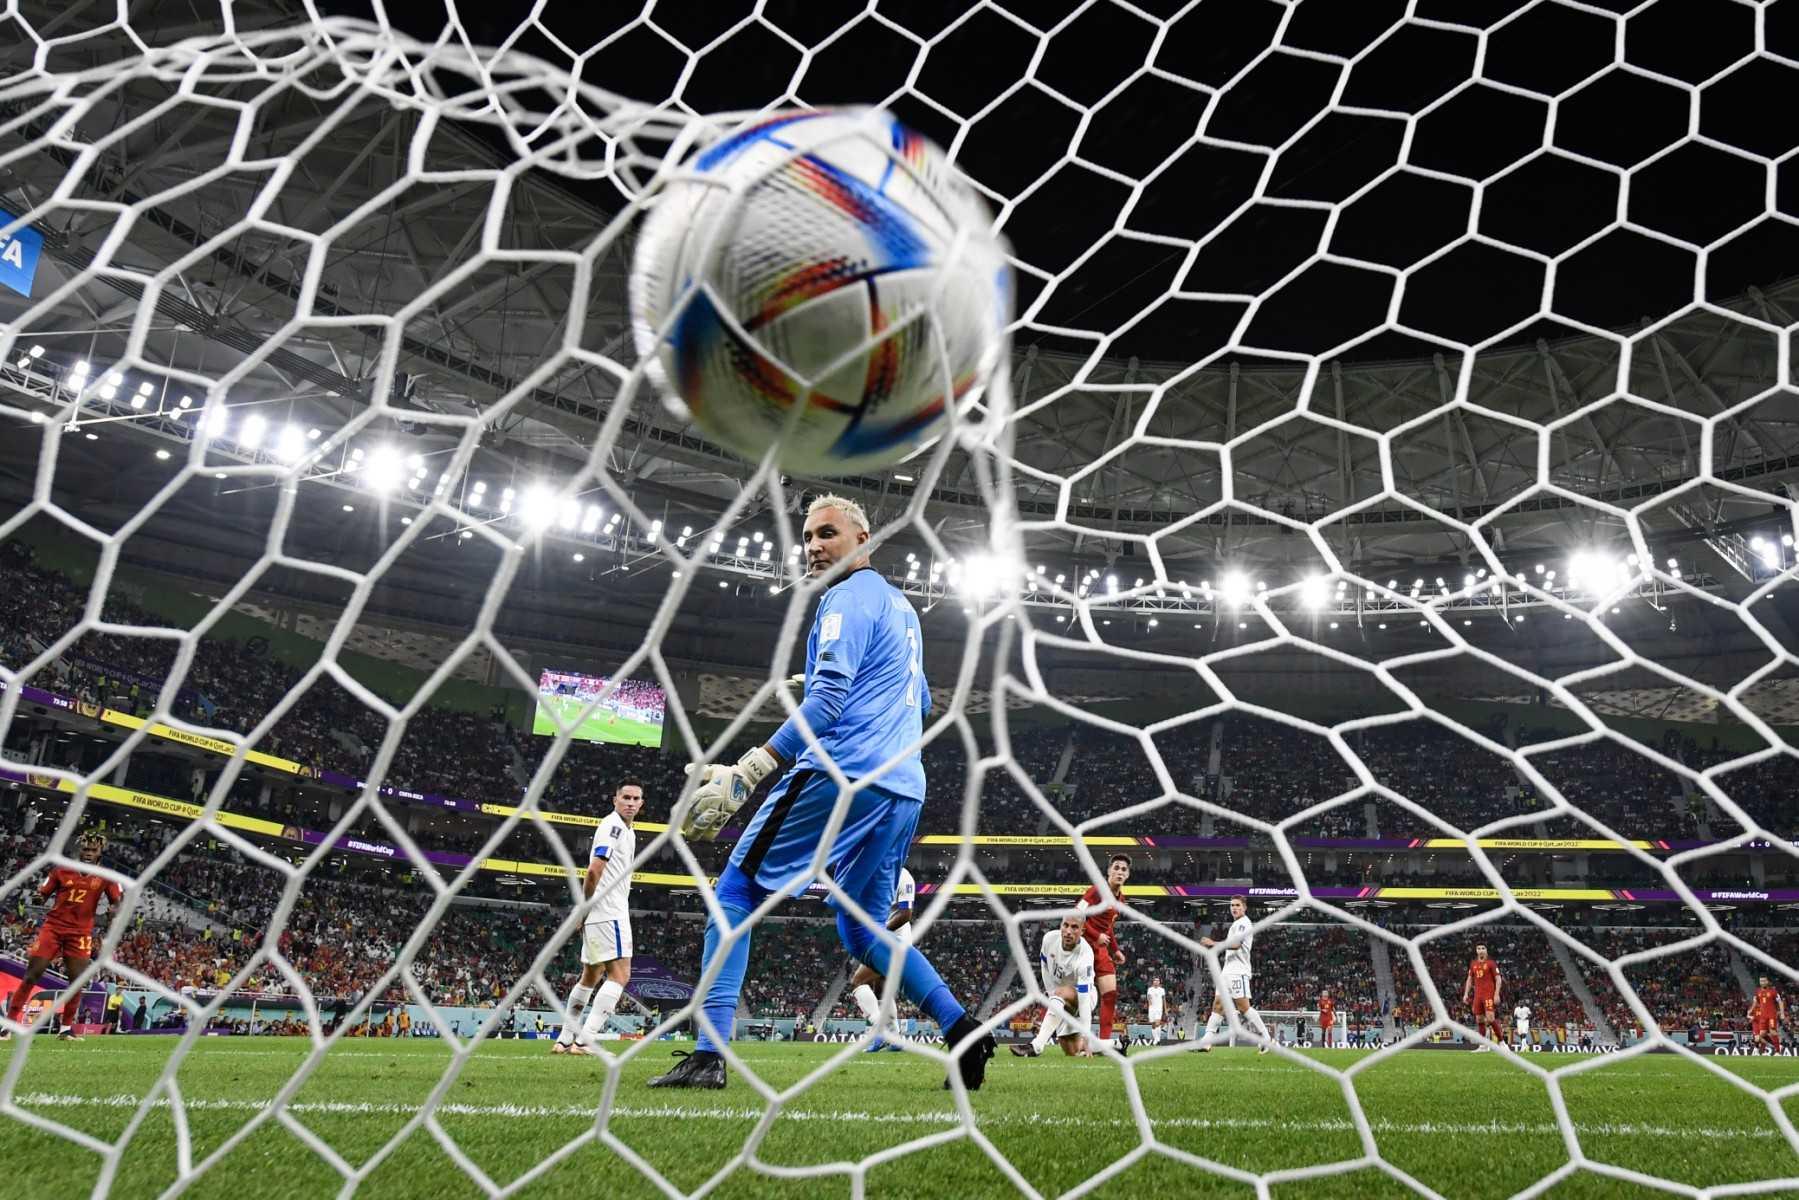 Spain's midfielder Gavi scores his team's fifth goal during the Qatar 2022 World Cup Group E football match between Spain and Costa Rica at the Al-Thumama Stadium in Doha on Nov 23. Photo: AFP